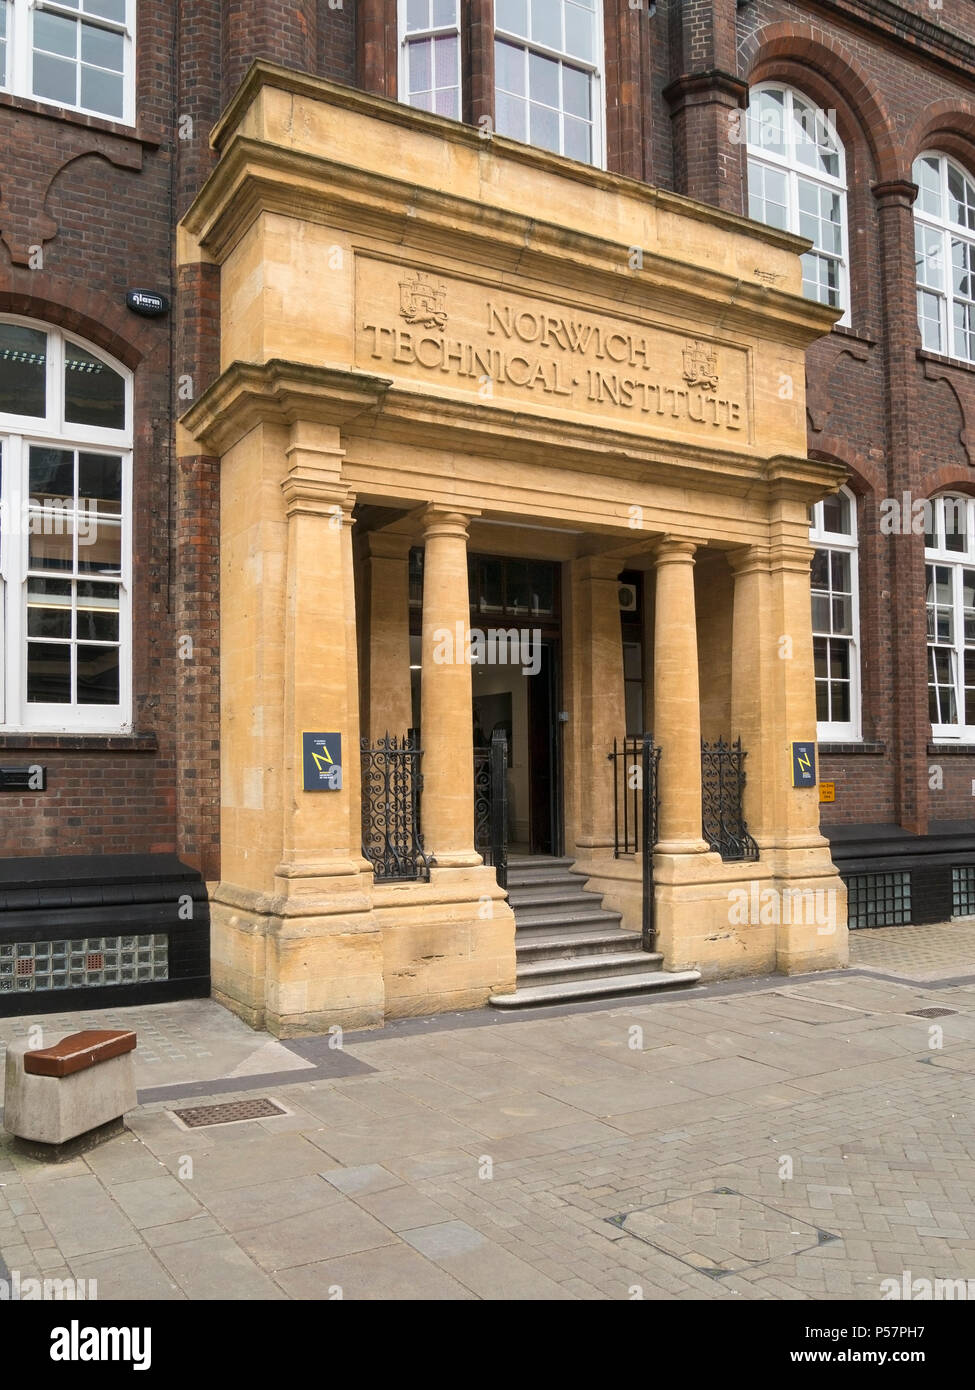 Ornate stone porch and entrance to Norwich Technical Institute Building (now St George's Building, Norwich University of the Arts), Norwich, England. Stock Photo